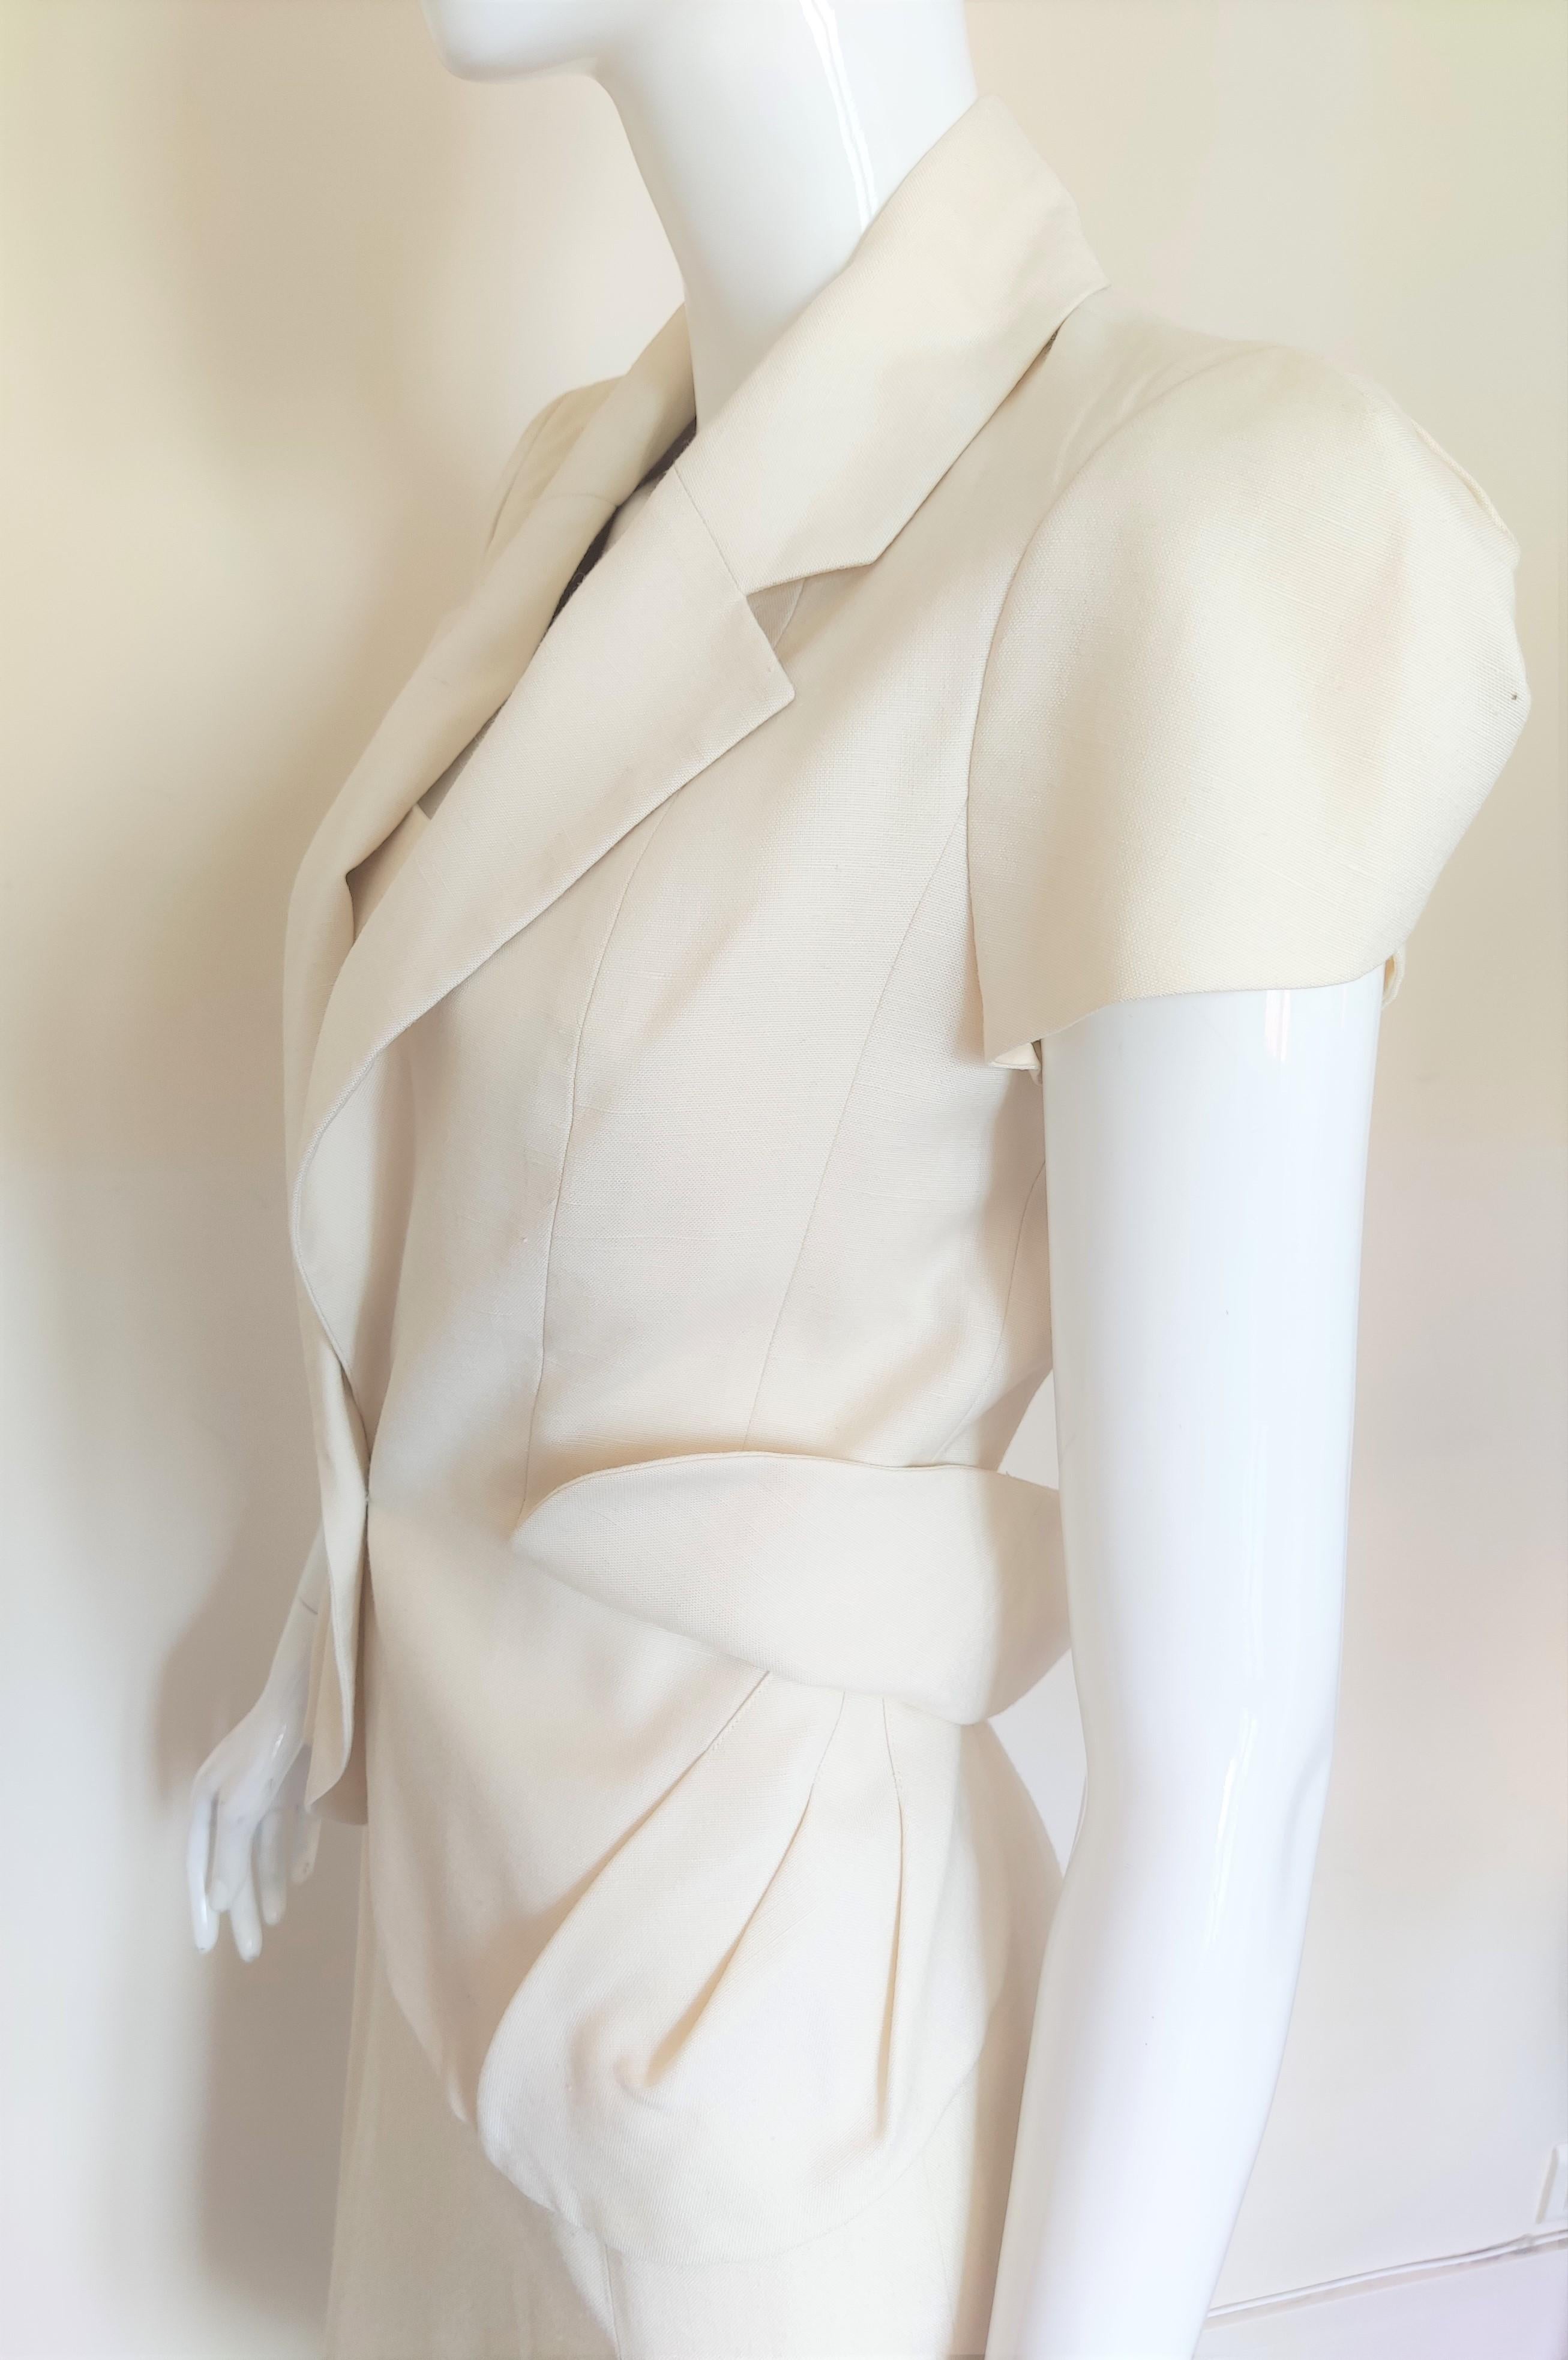 Early John Galliano S/S 1999 Runway Vintage Ivory Ensemble Dress Costume Suit For Sale 4